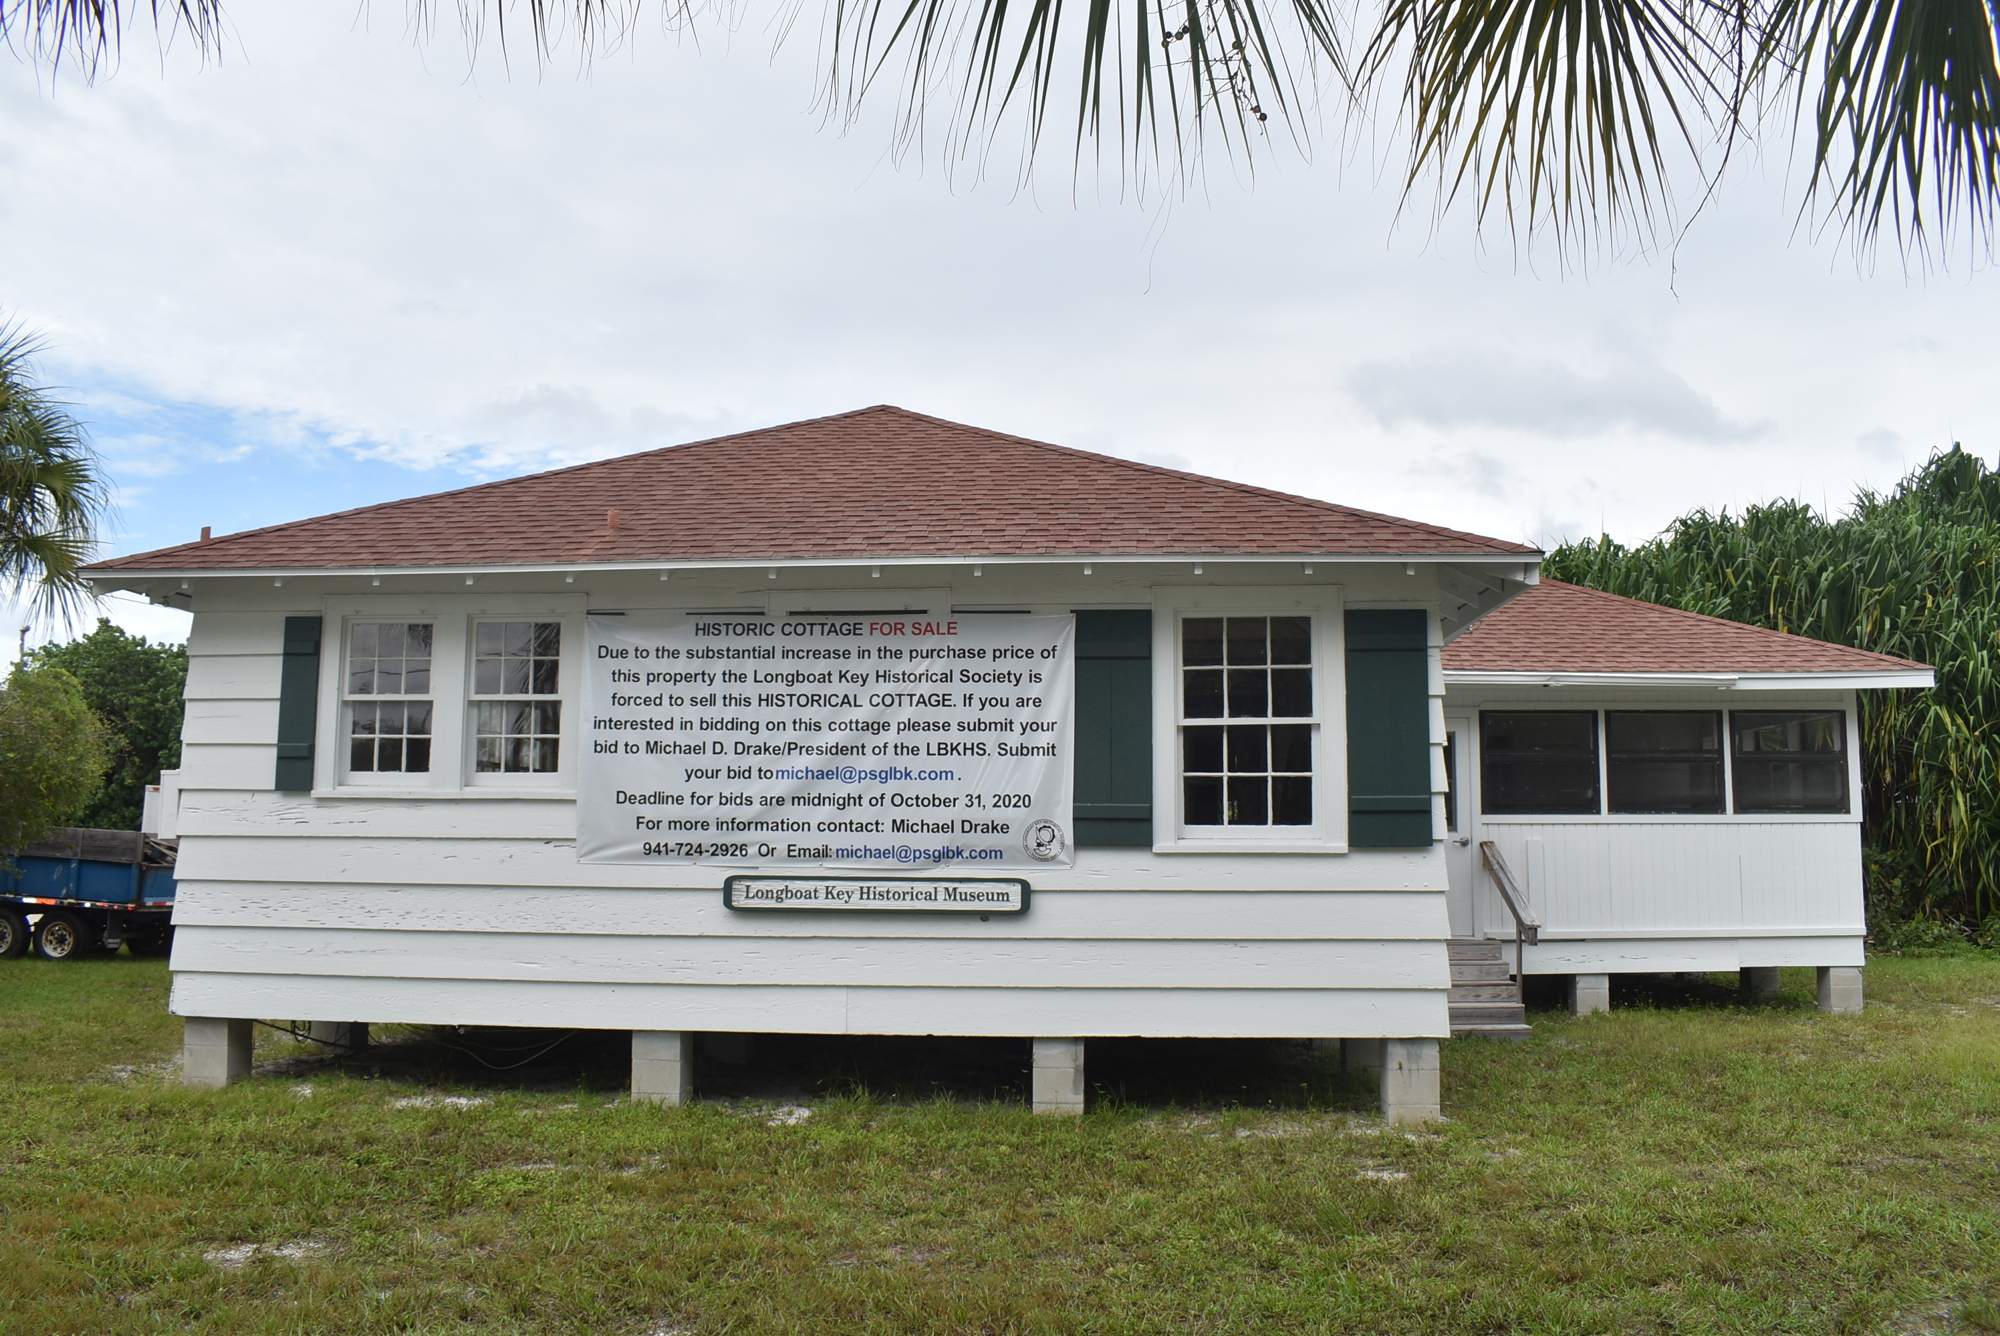 Longboat Key Historical Society President Michael Drake is looking for a new home for two historic cottages that currently sit at 521 Broadway St. Photo taken by Nat Kaemmerer.